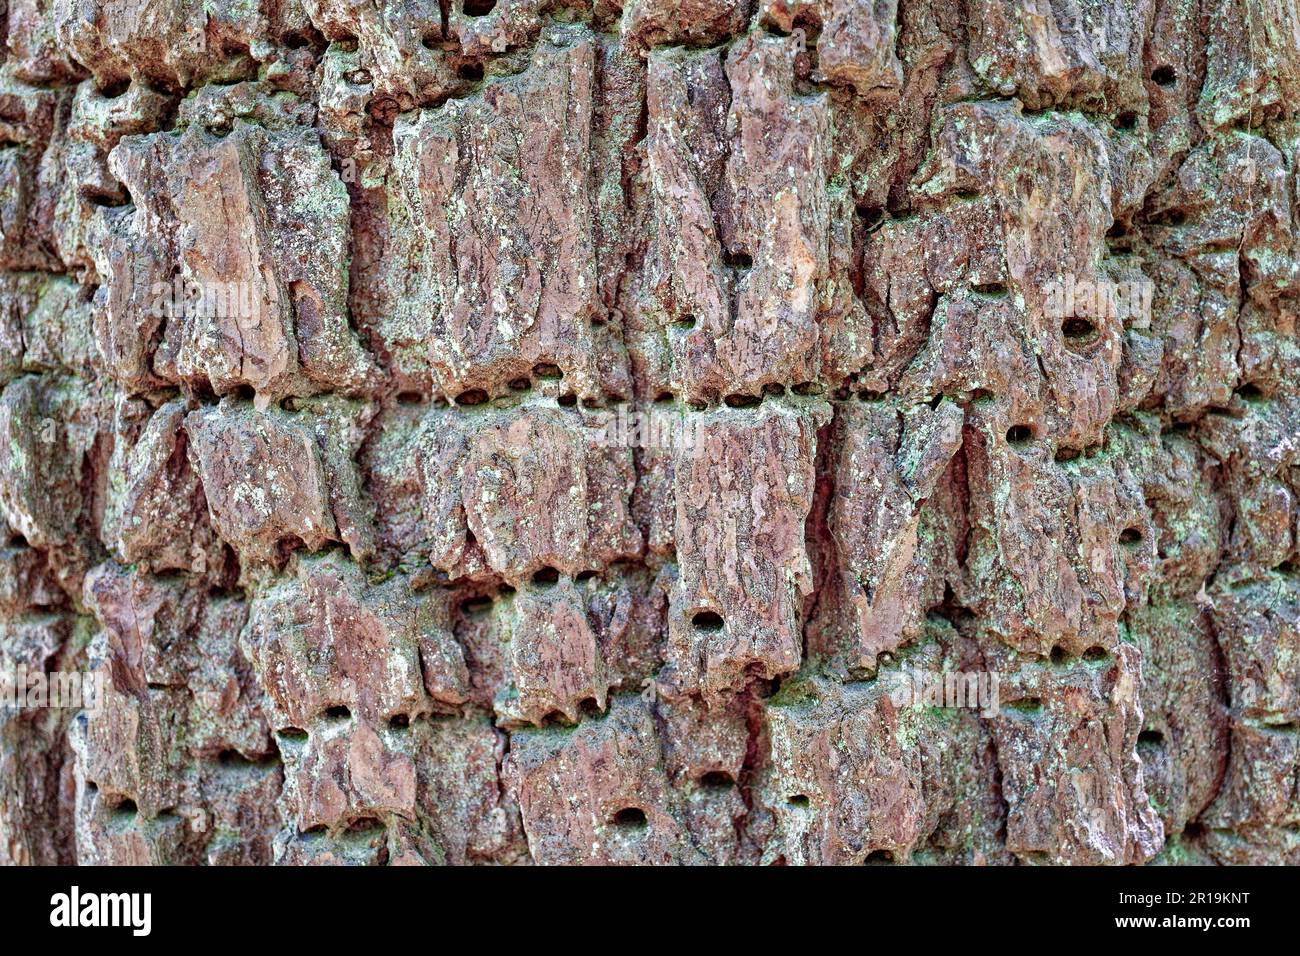 Textured tree bark with tiny holes closeup view for backgrounds wallpaper flat-lay and copy space uses Stock Photo